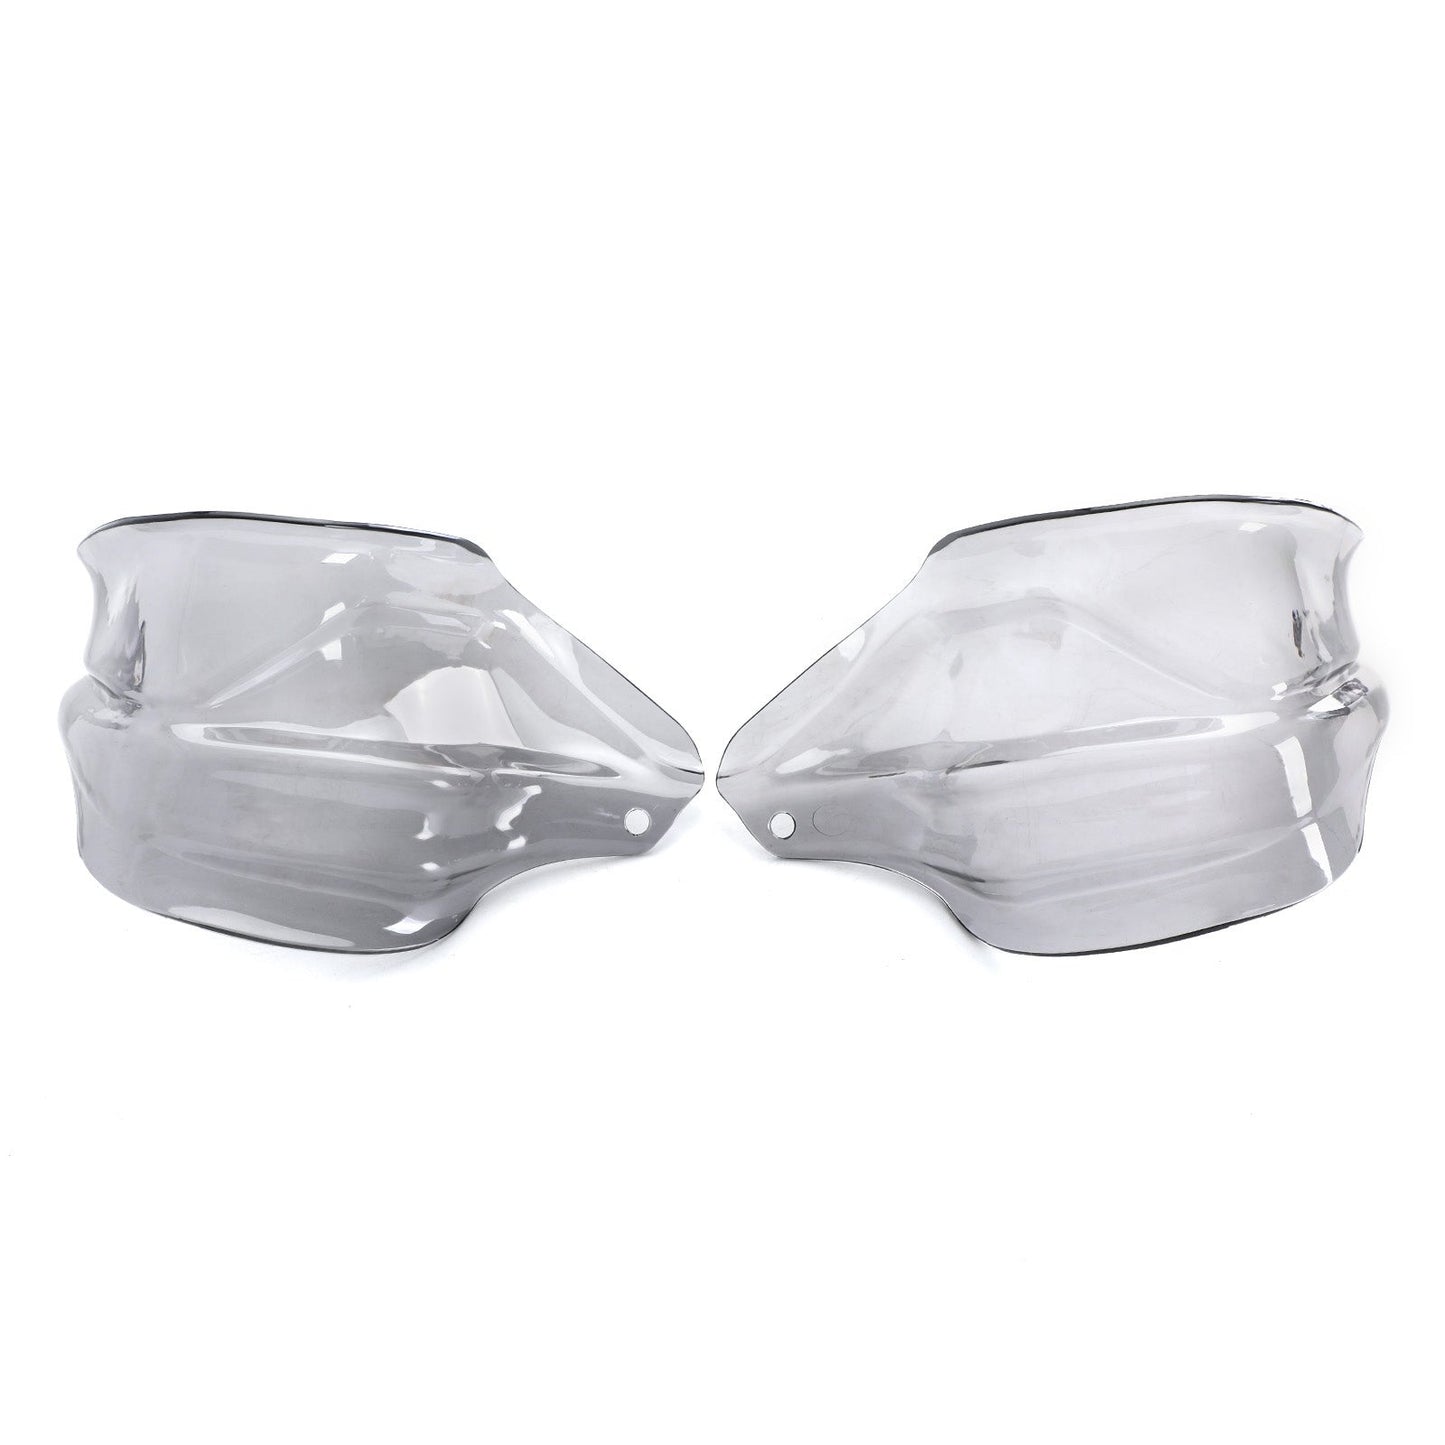 Motorcycle Protector Hand Guards Fit For BMW G310GS G310R 17-21 GRY